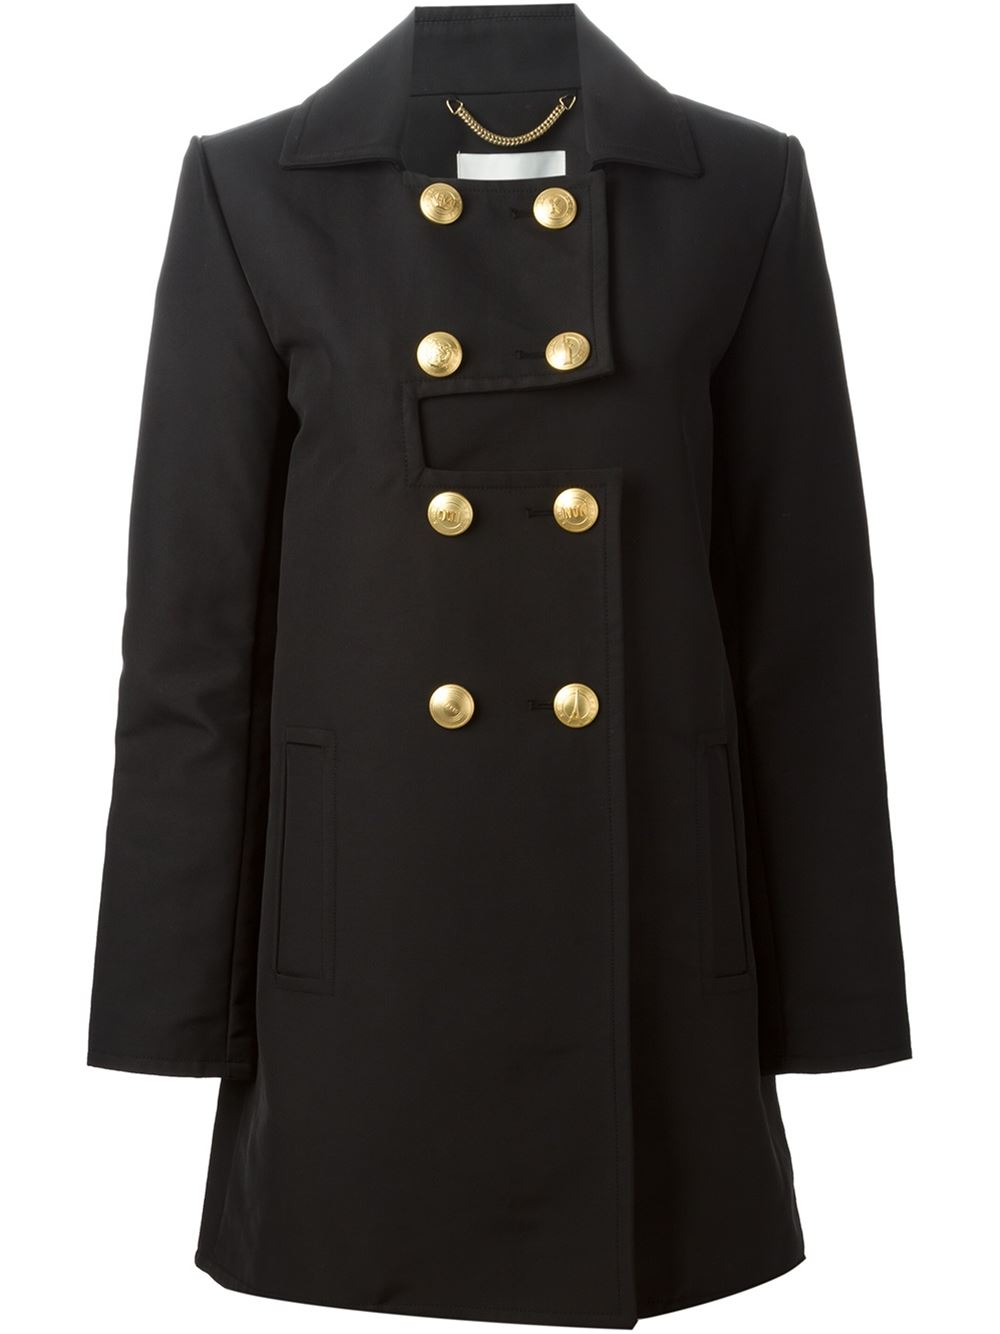 Kenzo Double Breasted Coat in Black | Lyst